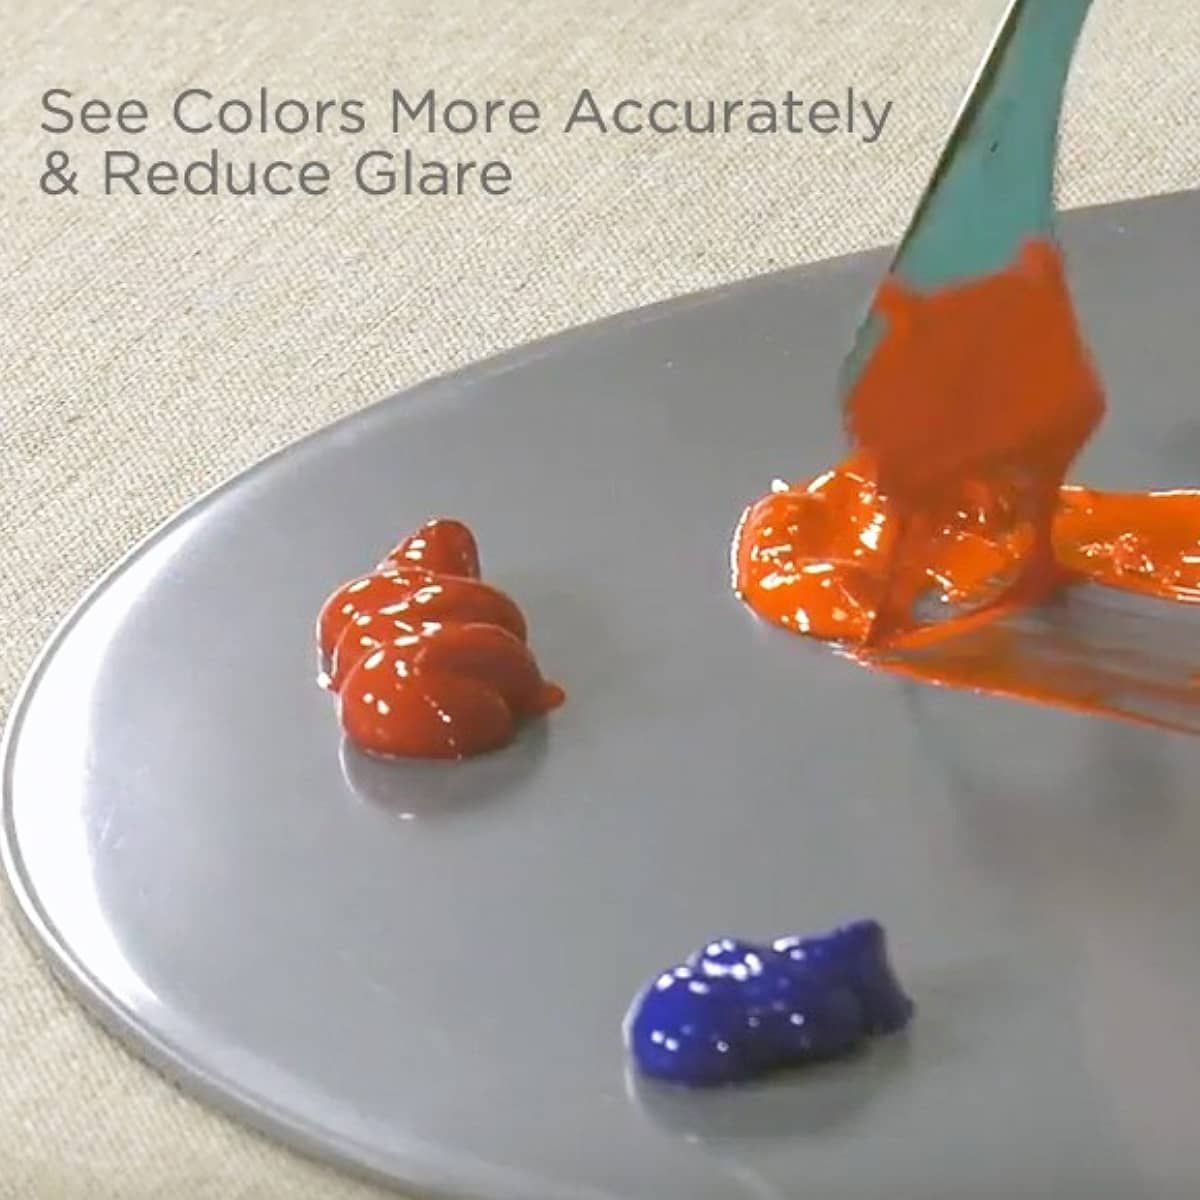 See colors more accurately & reduce glare